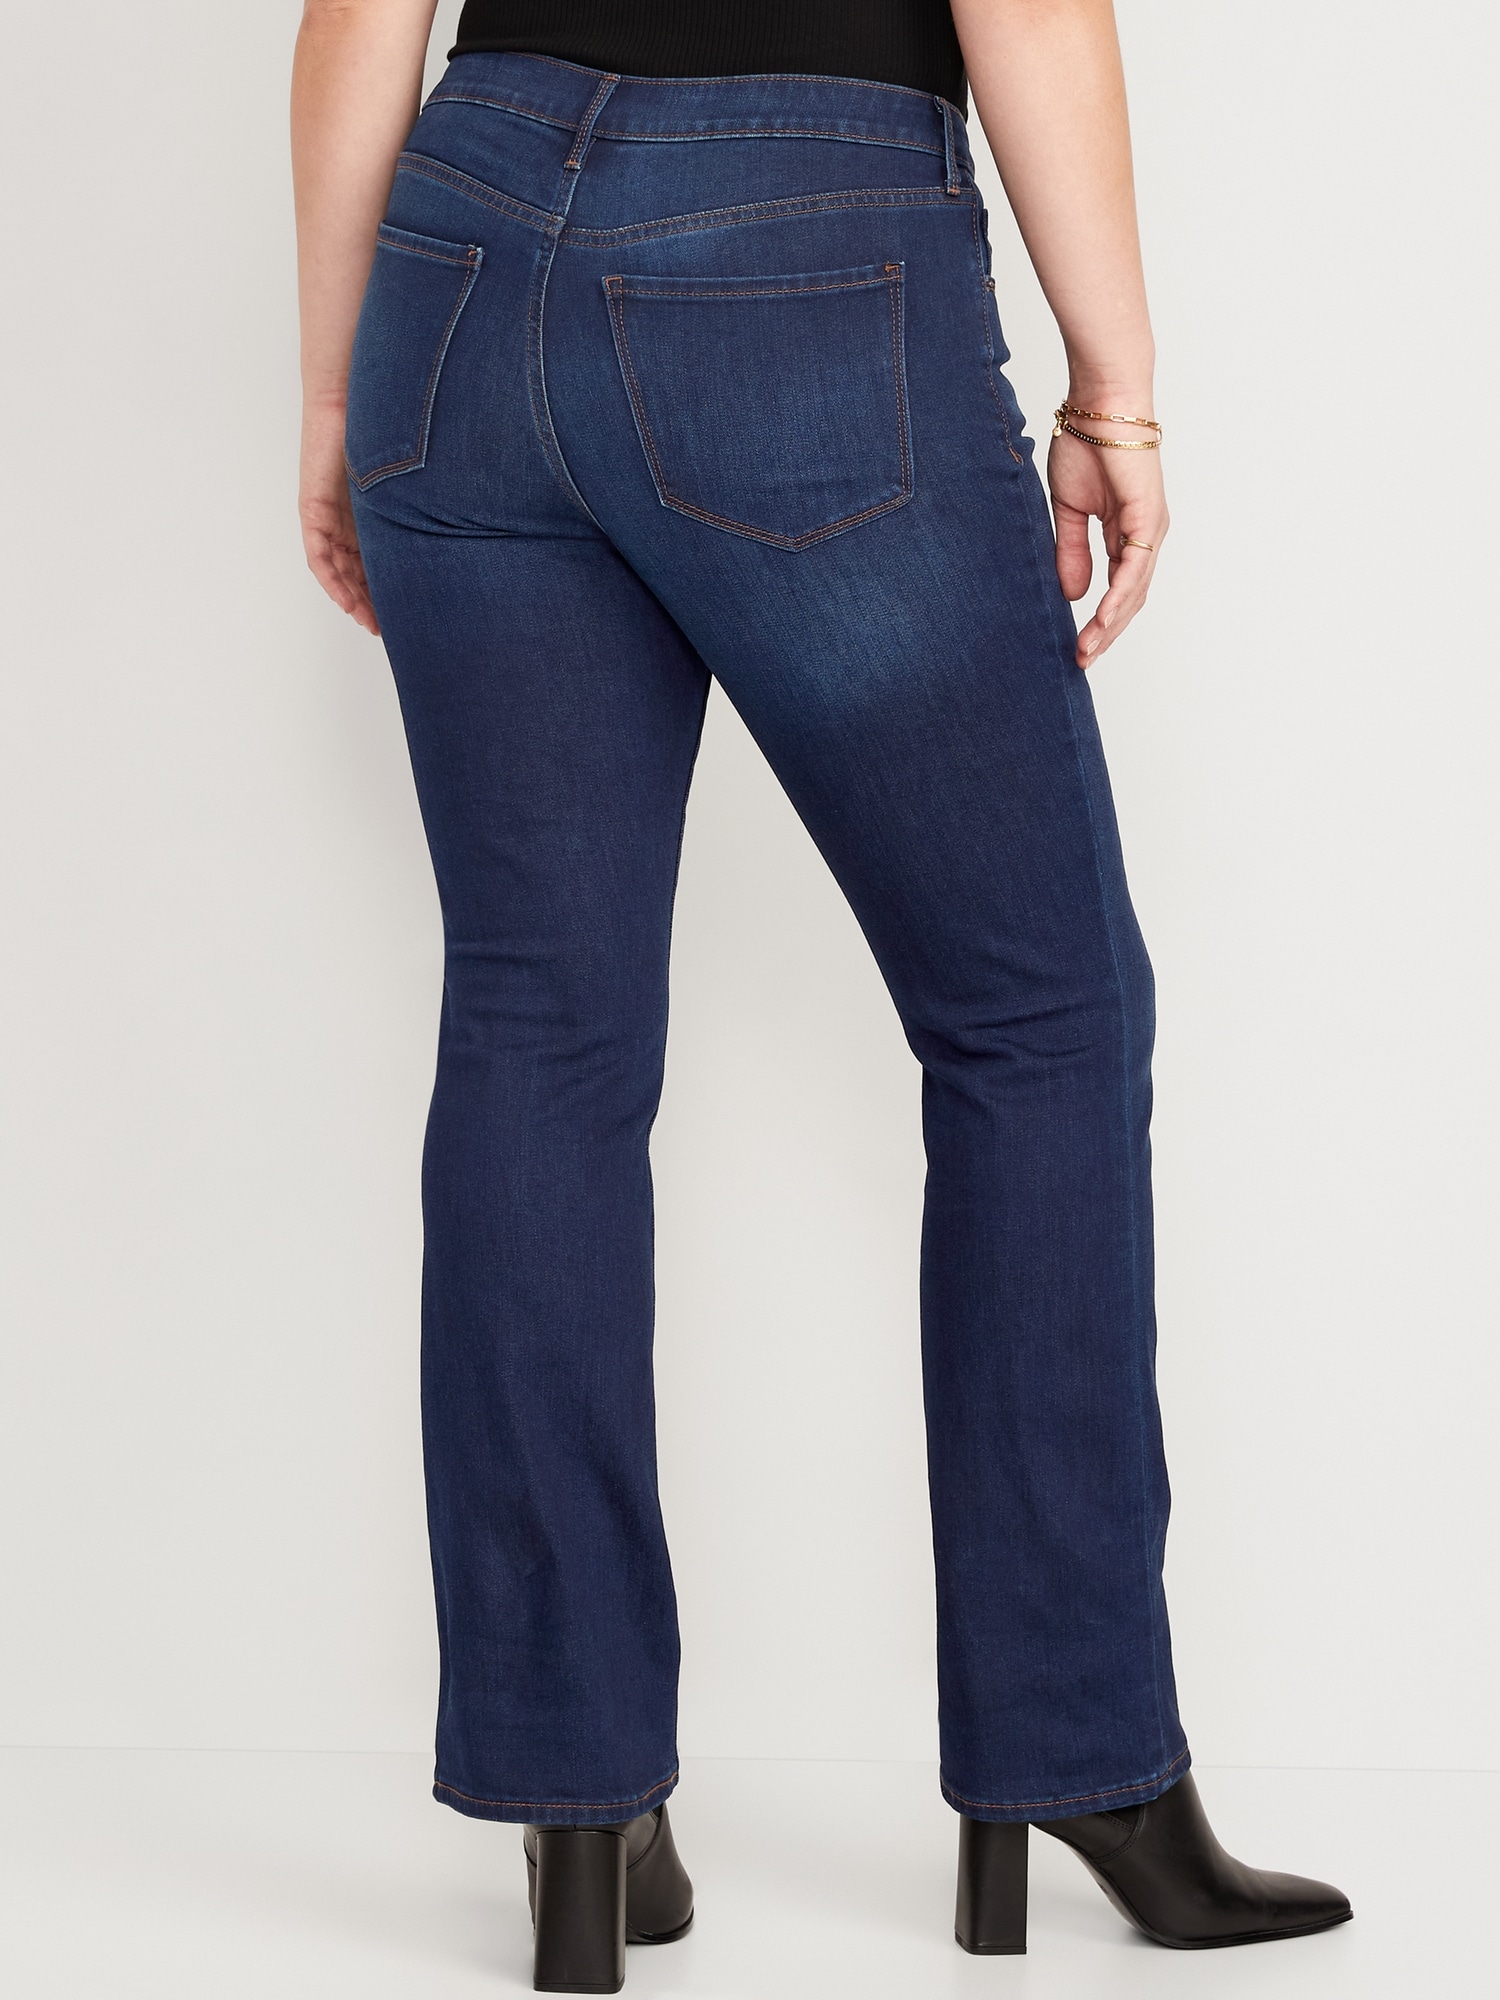 Women's Recover High Rise Bootcut Blue Jeans | Lands' End